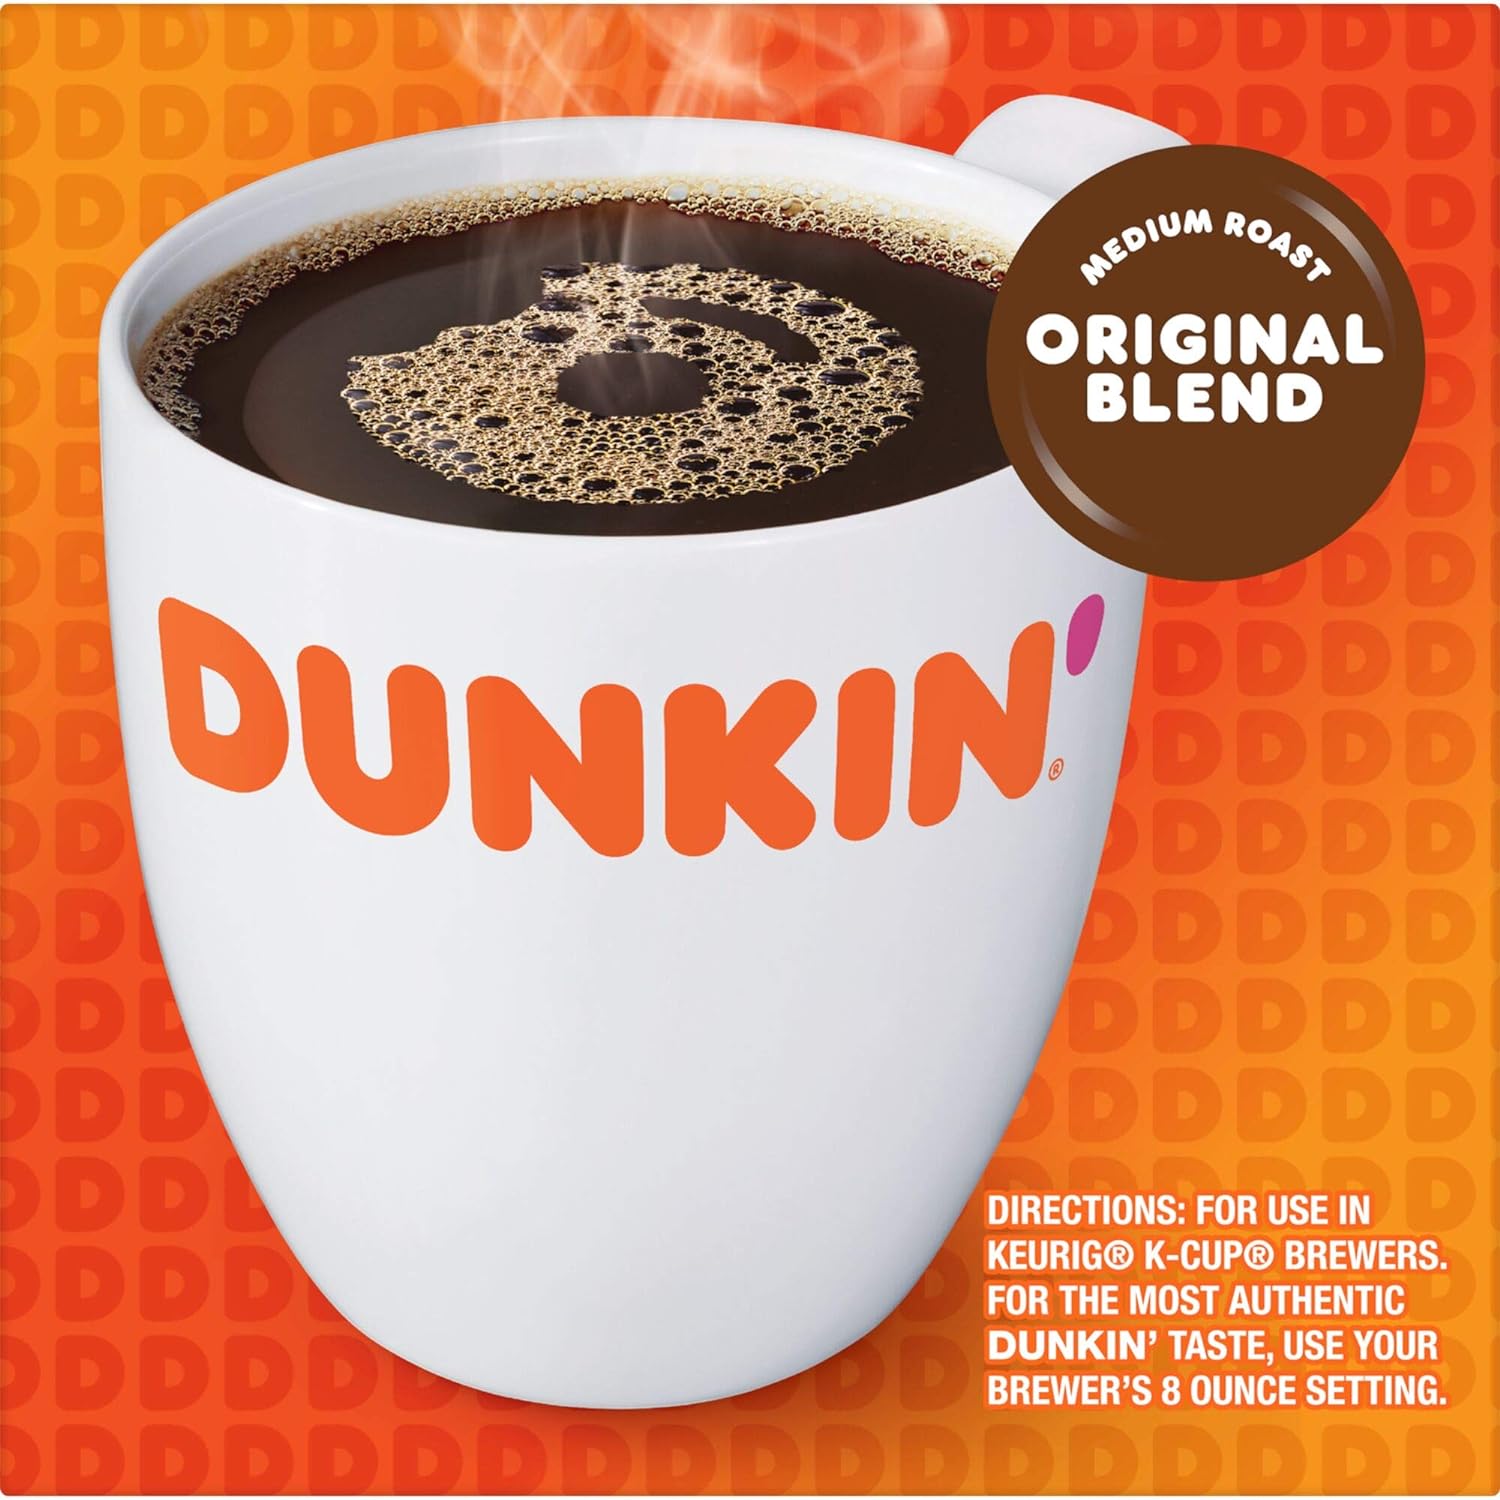 Wholesale prices with free shipping all over United States Dunkin' Original Blend Medium Roast Coffee, 128 Keurig K-Cup Pods - Steven Deals